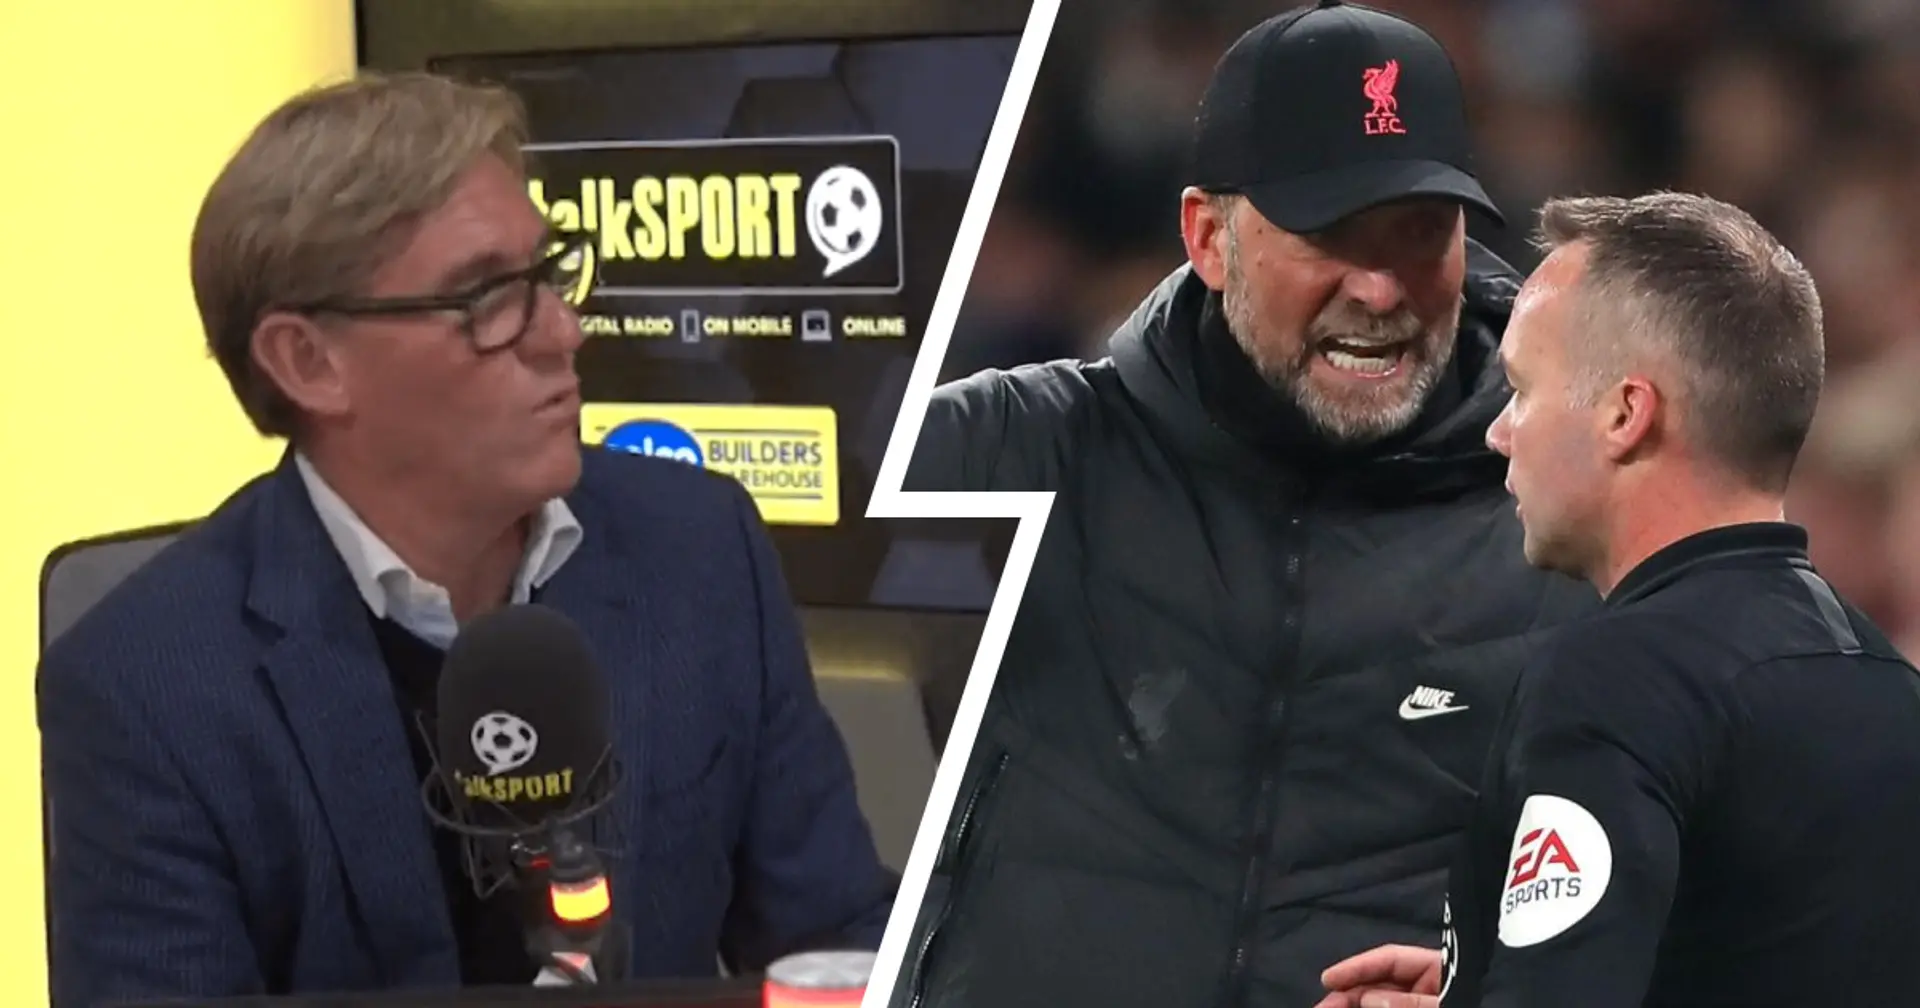 'These bloody managers should behave themselves!': ex-Palace owner Jordan slams Klopp, believes FA should've banned him